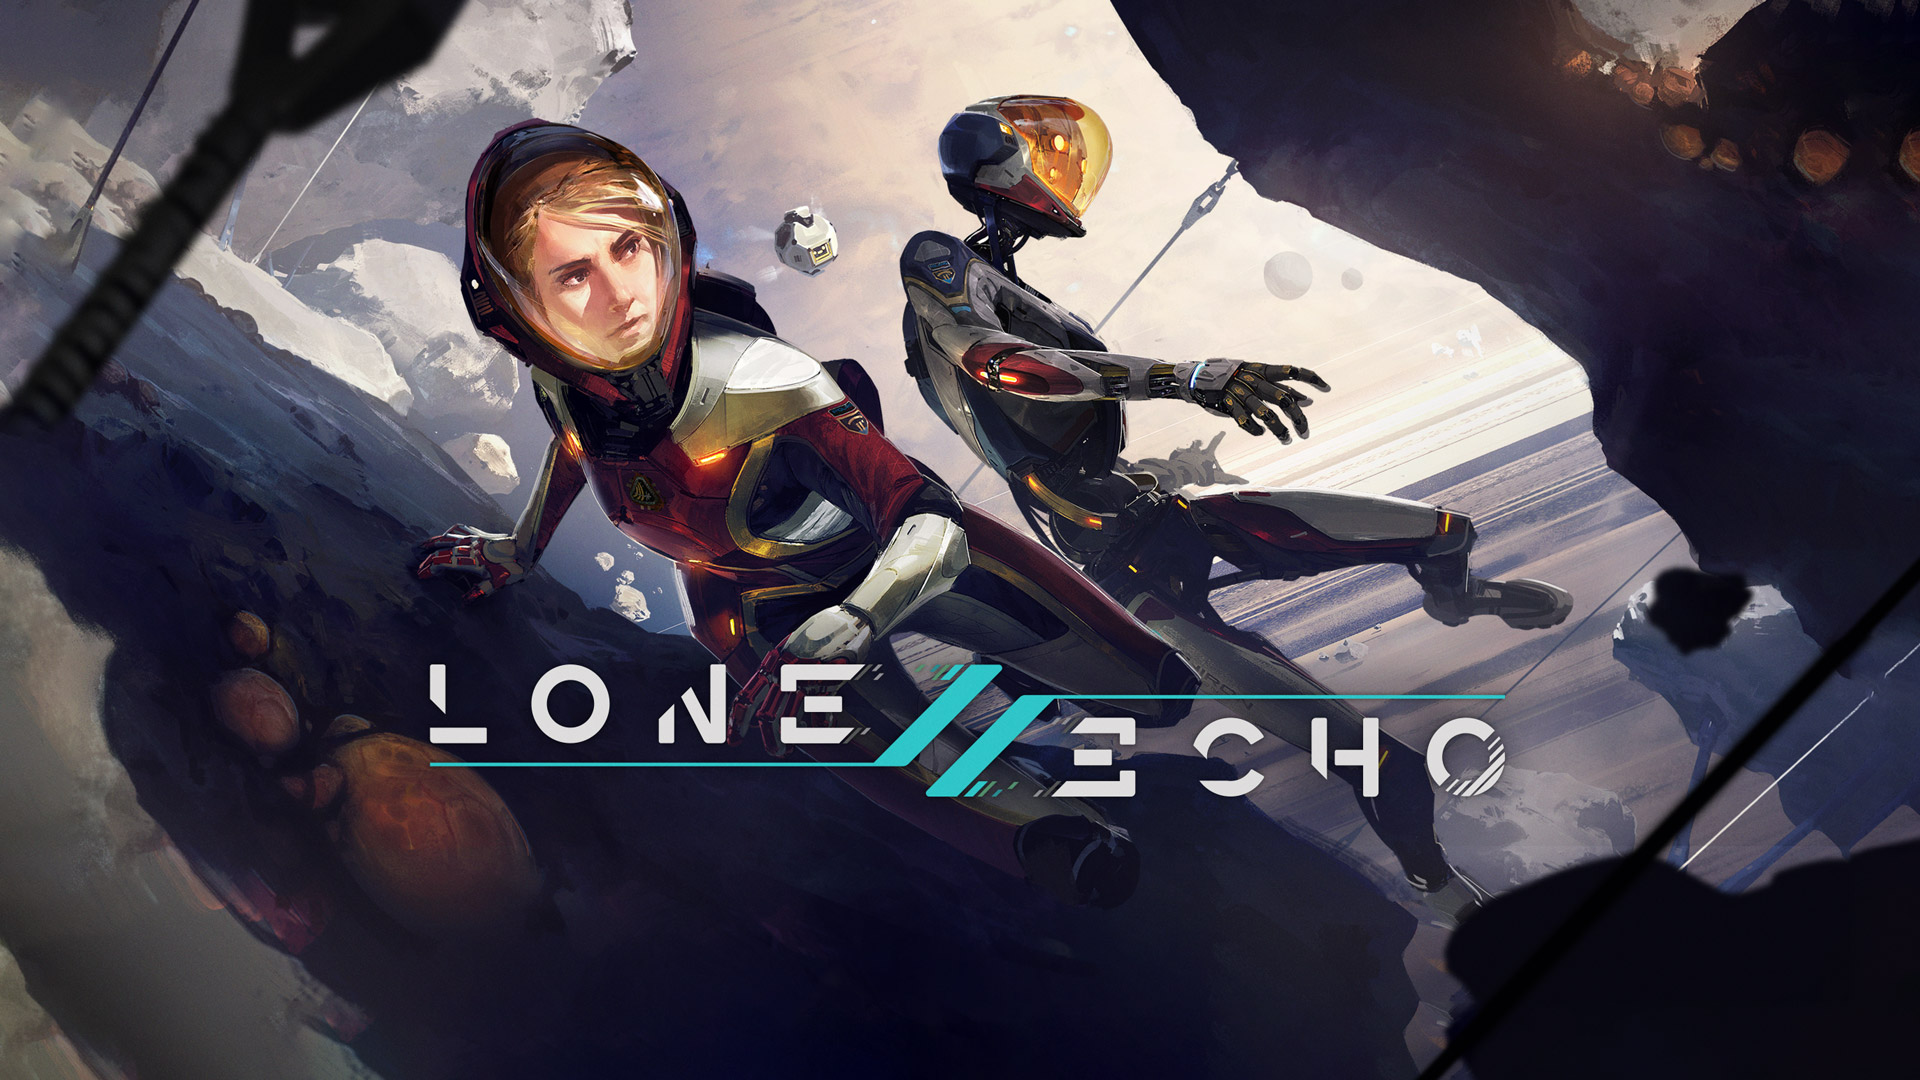 ‘Lone Echo II’ Review – A Long Wait for a Safe Sequel